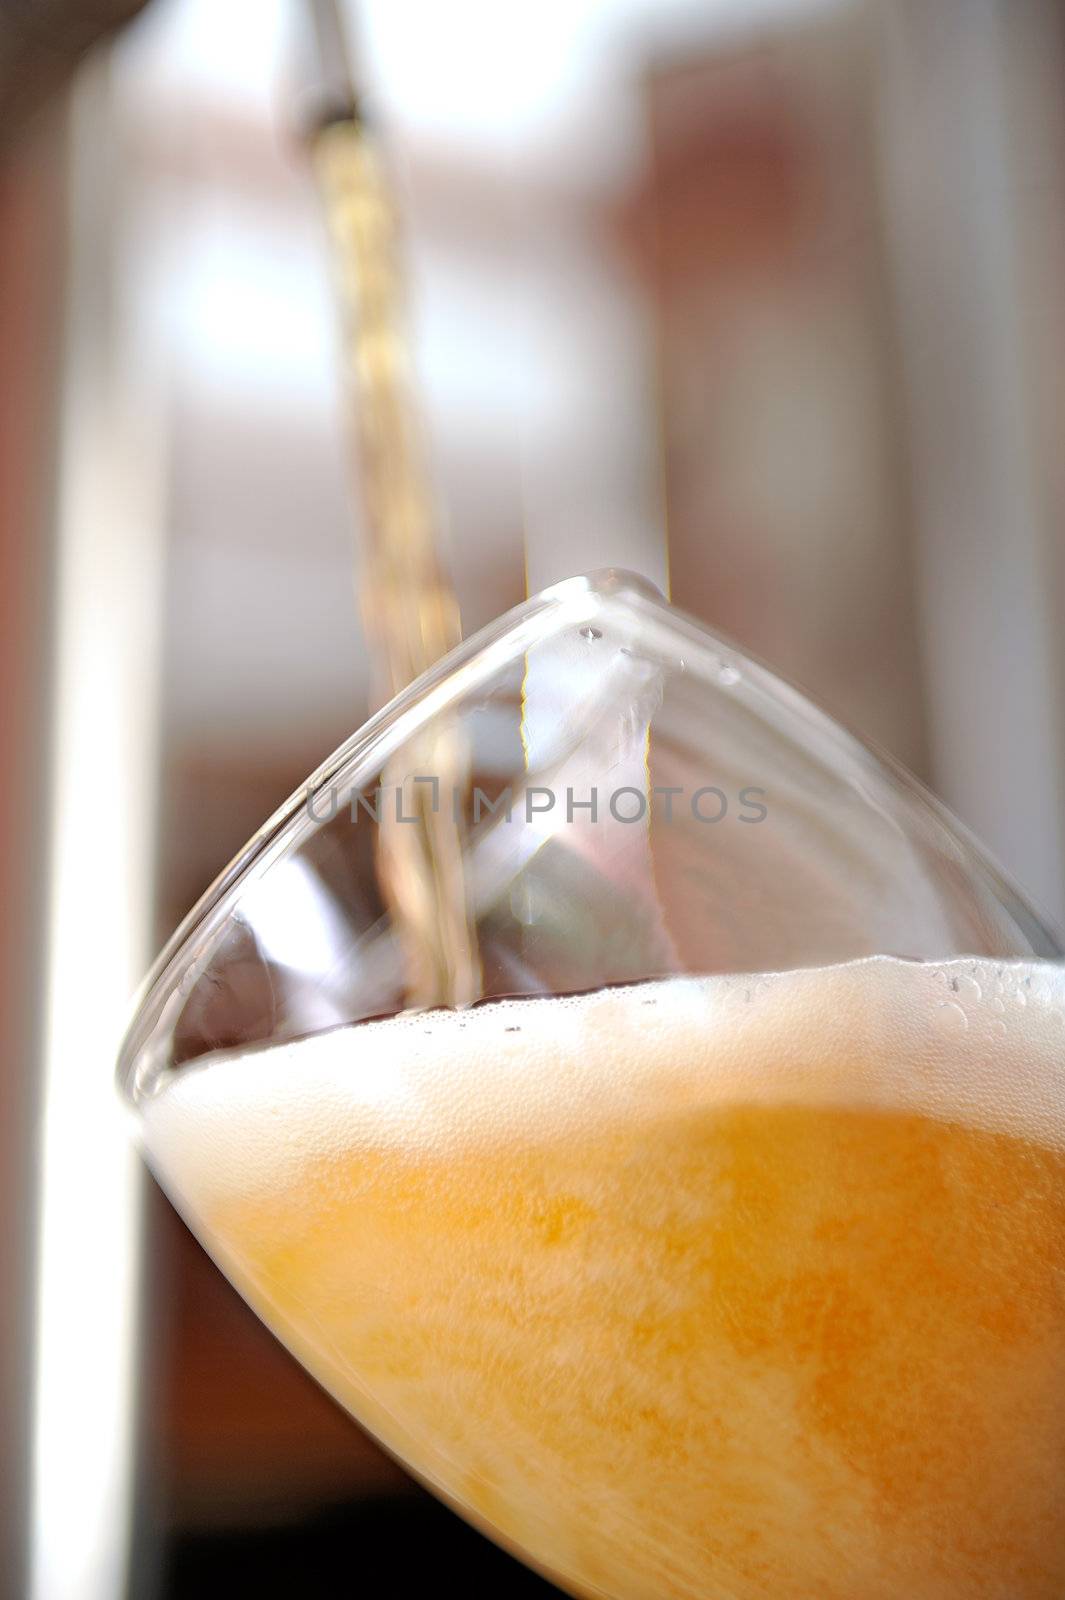 Beer into glass by Sevaljevic